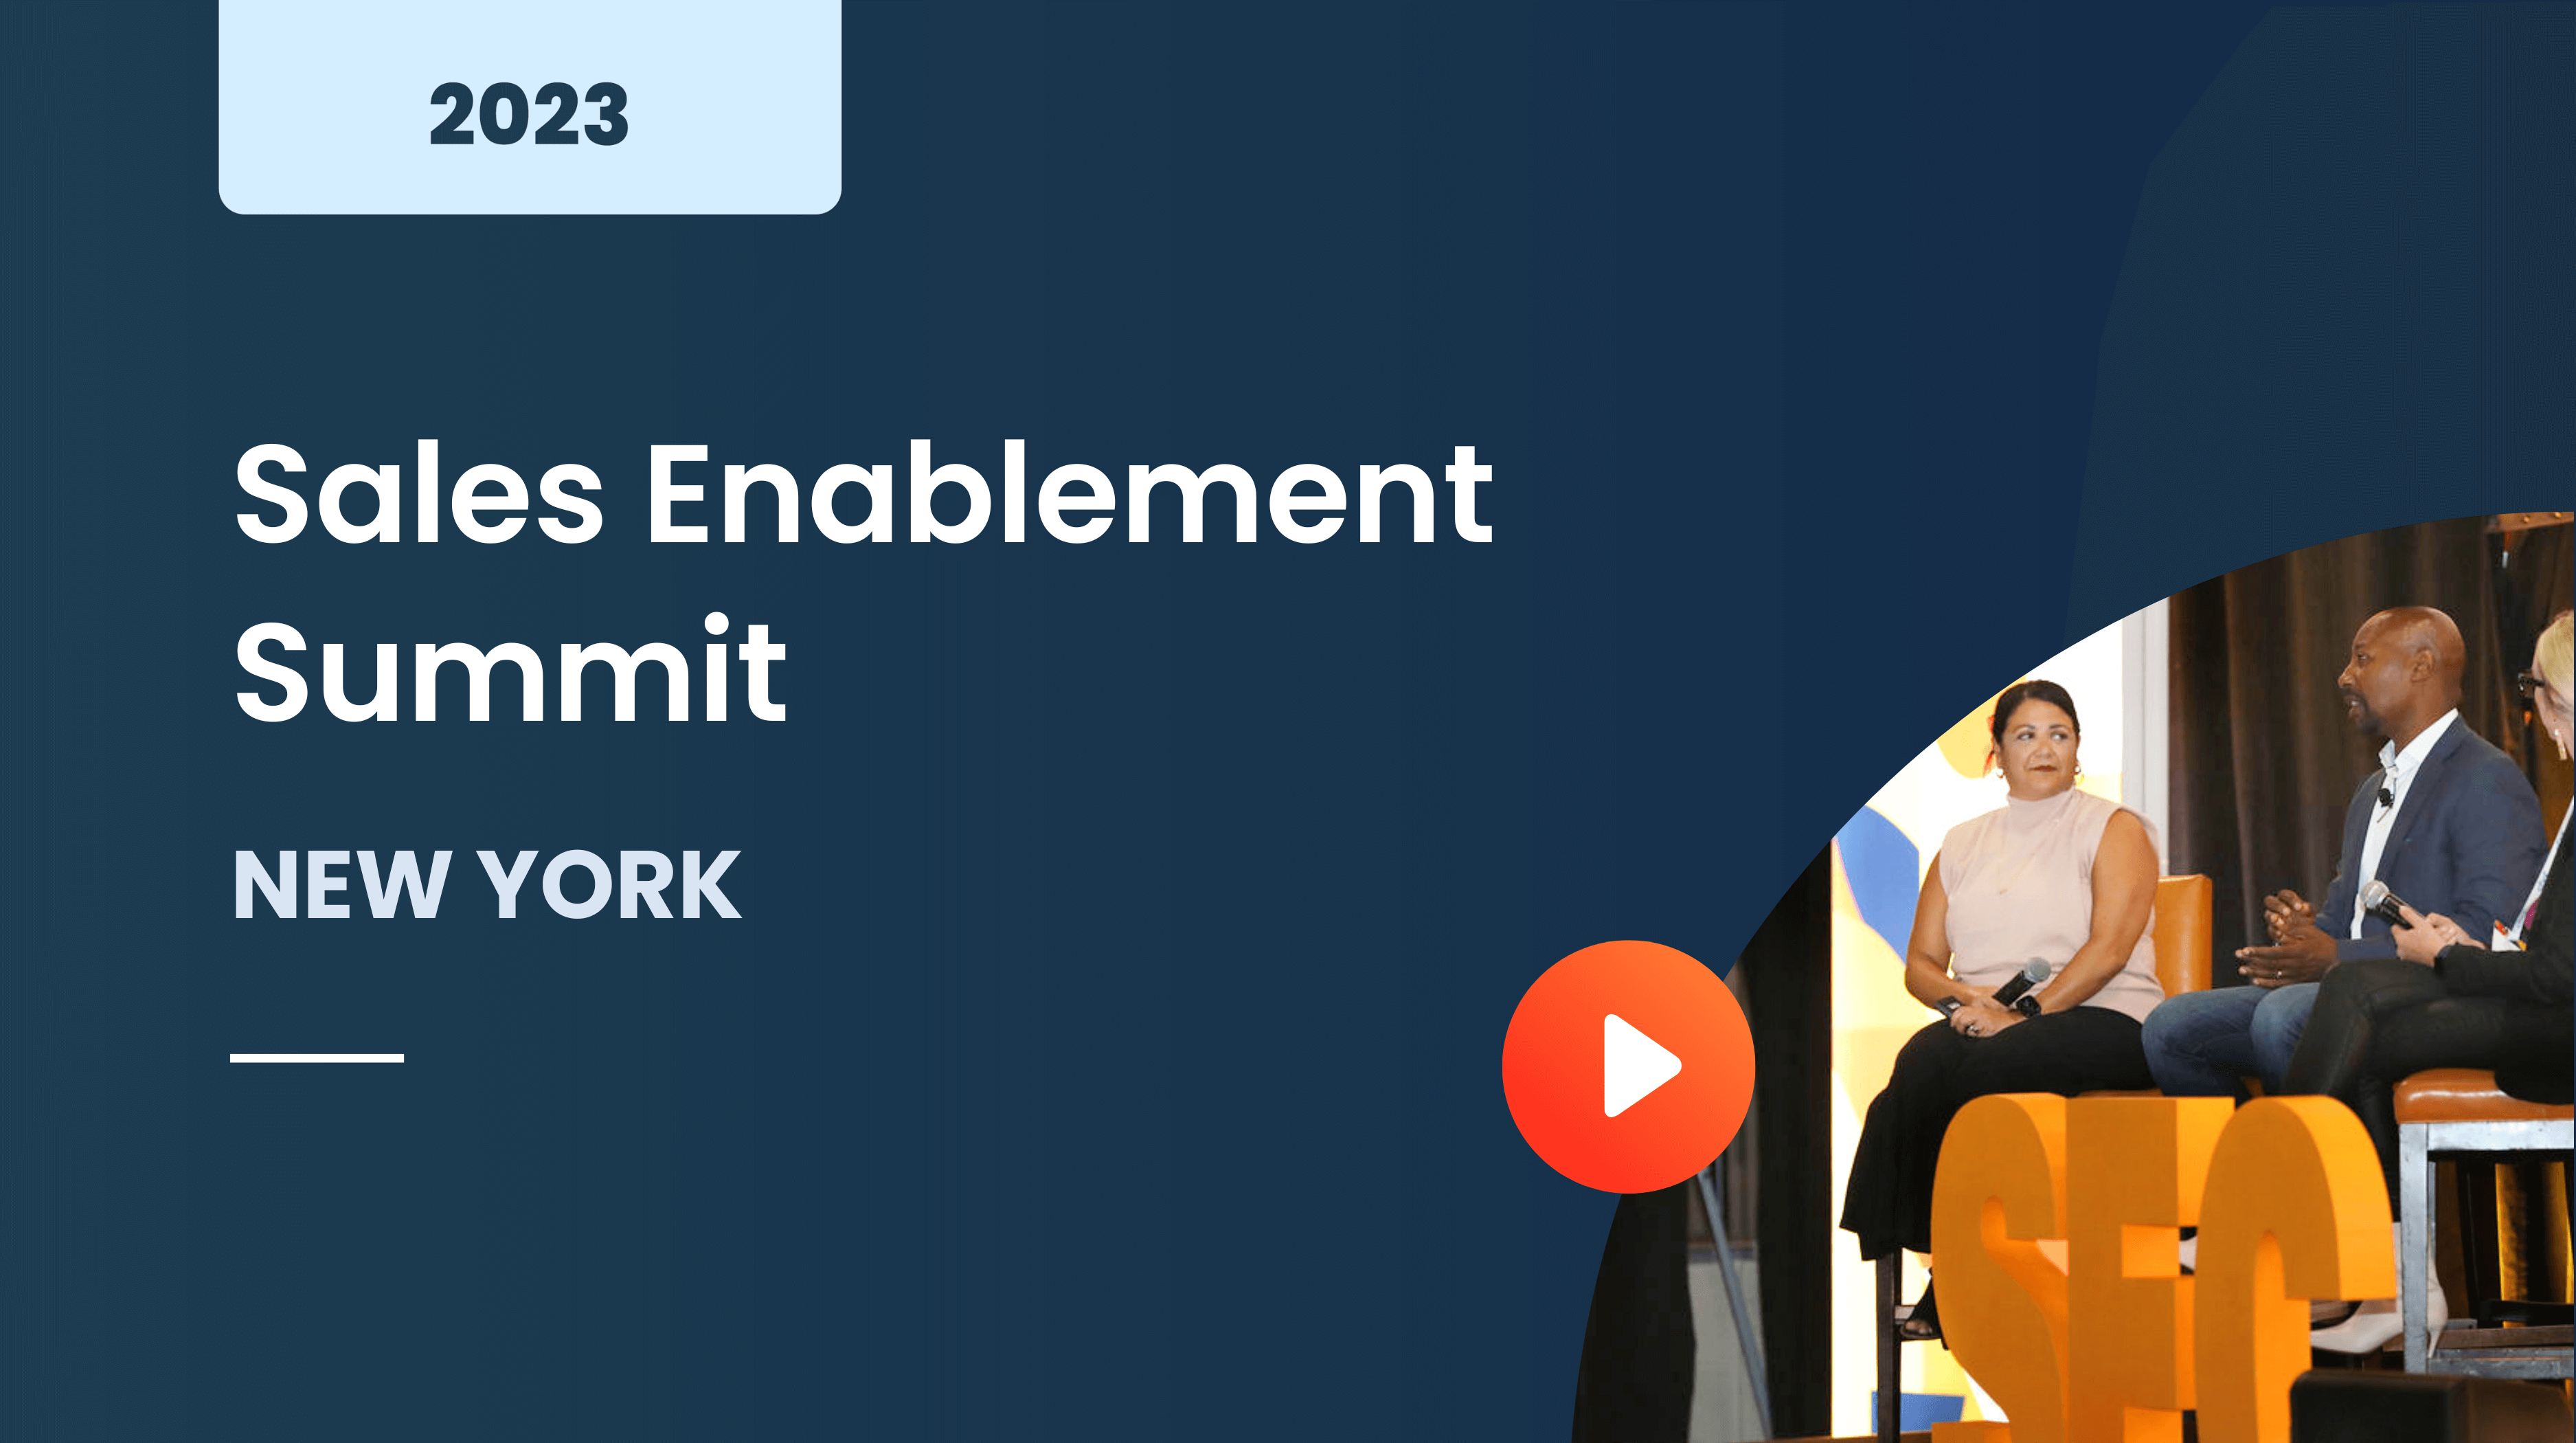 Sales Enablement Summit New York March 2023